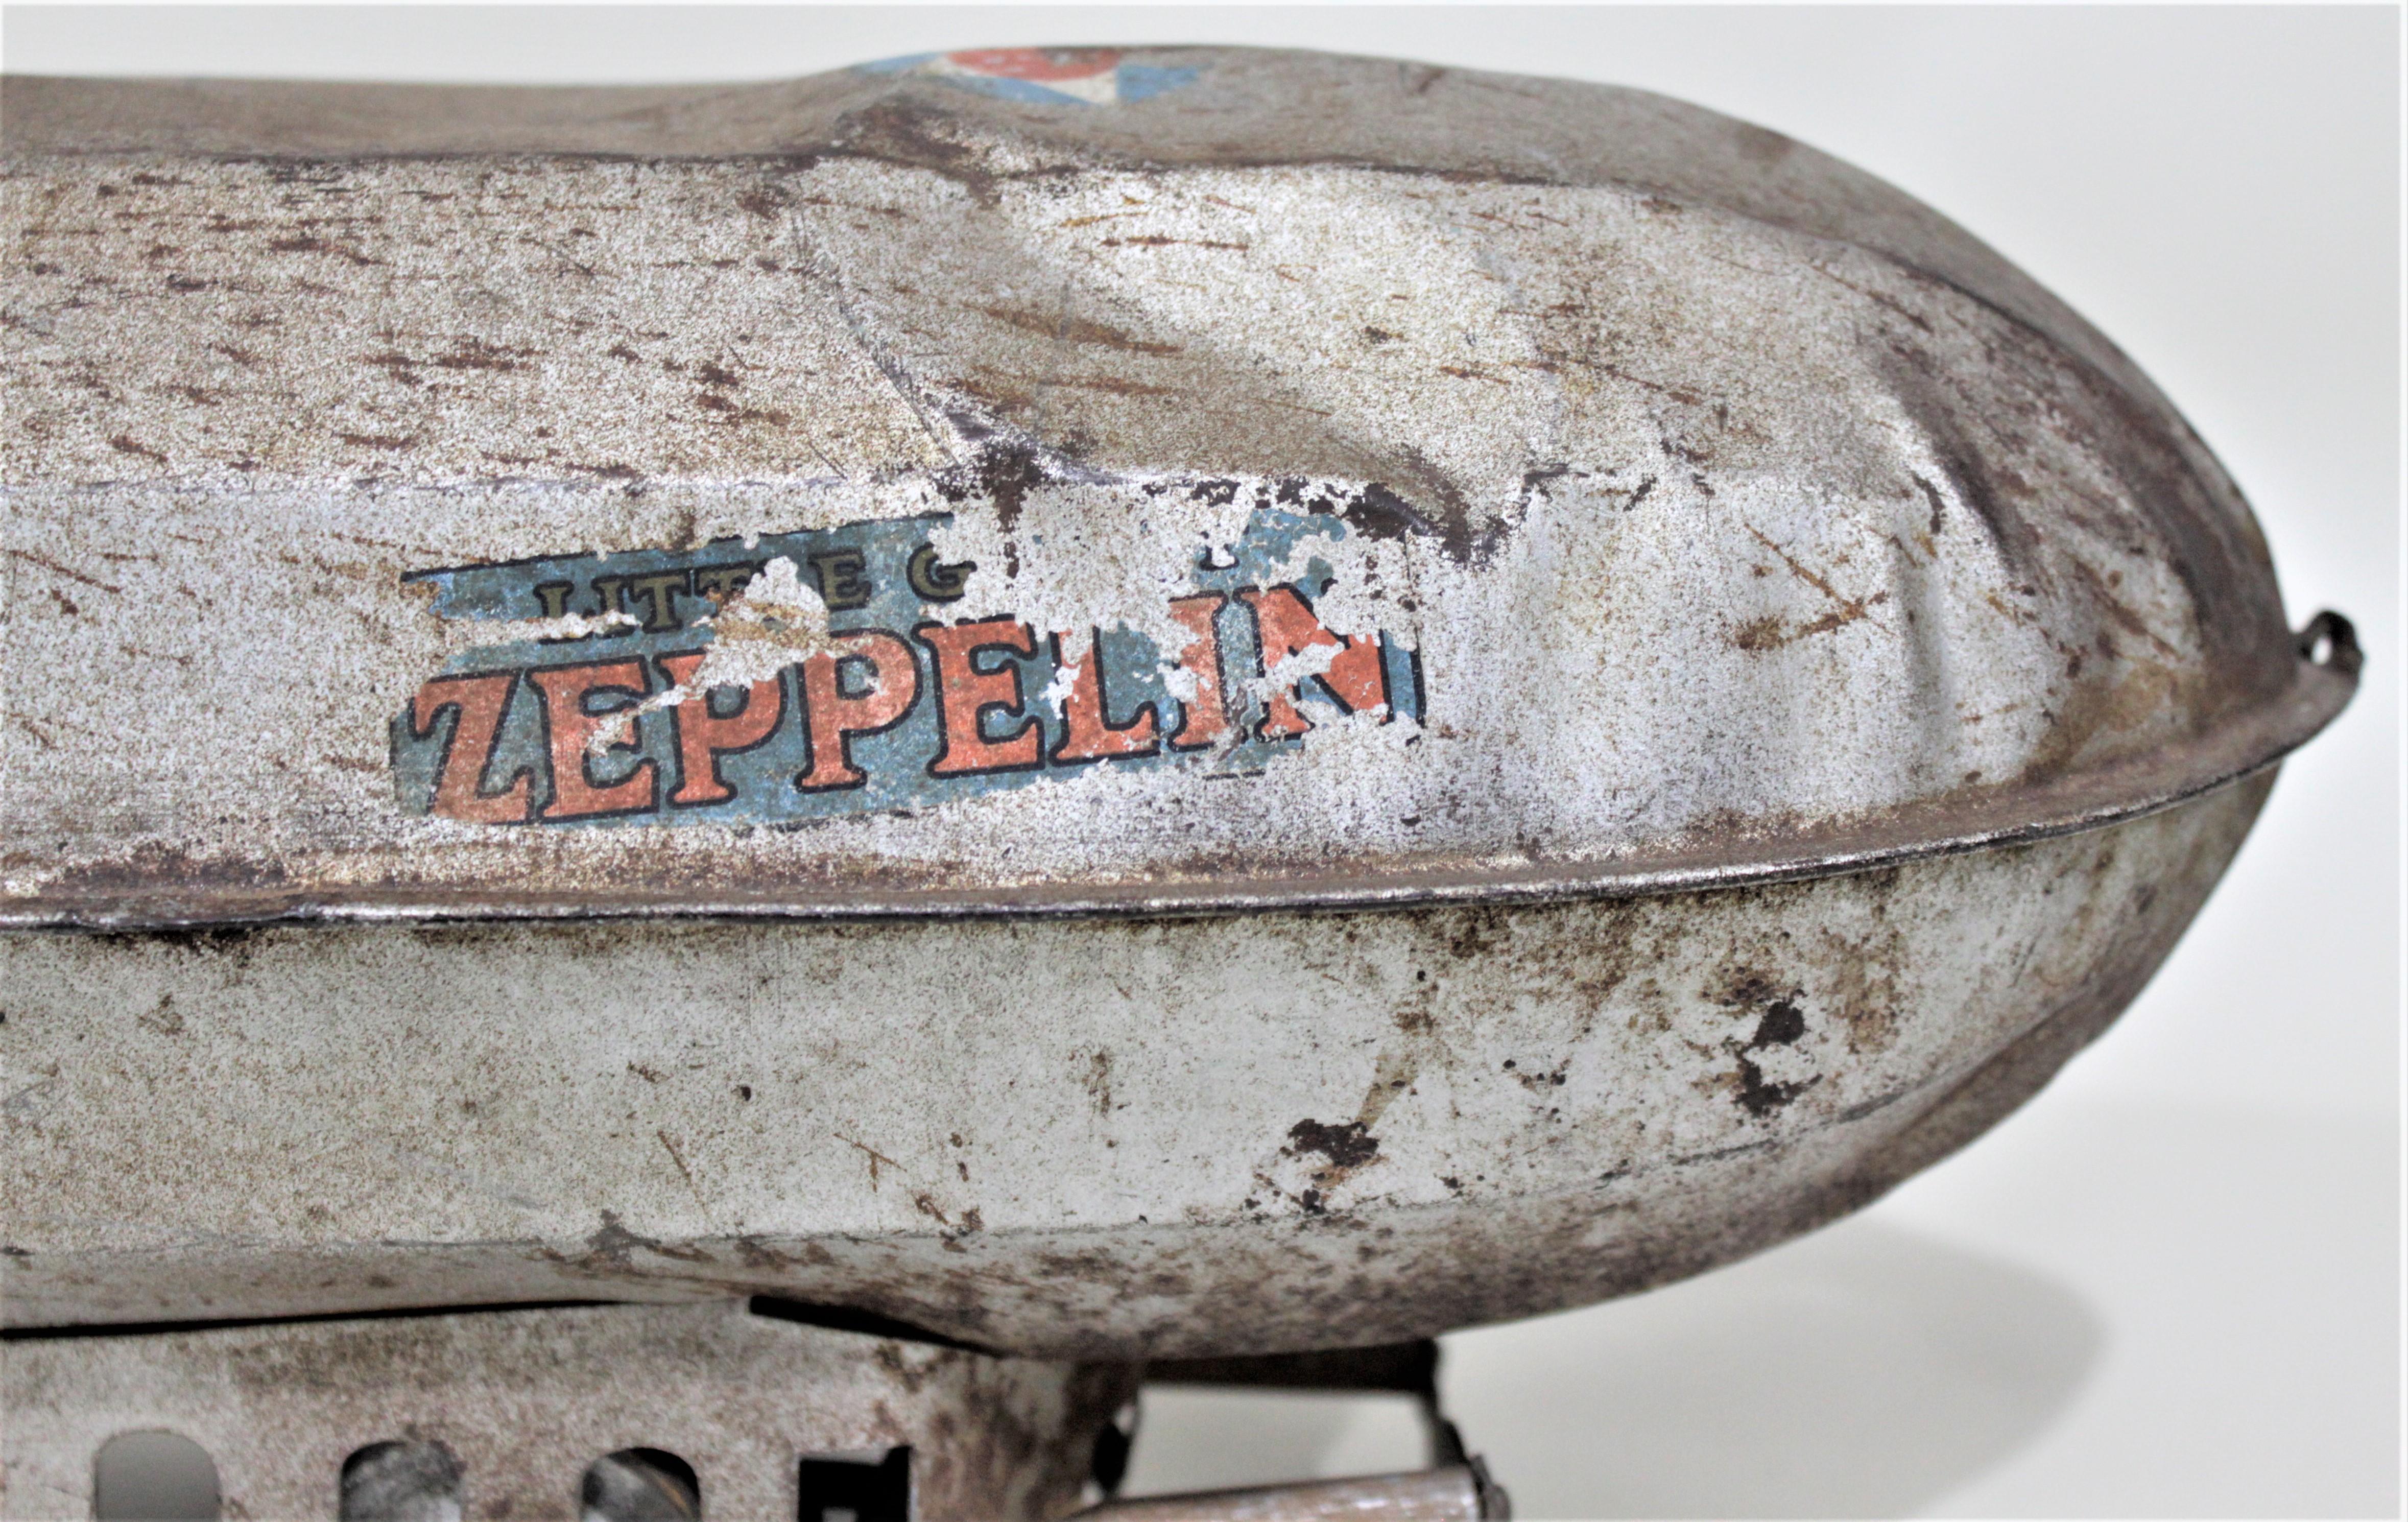 20th Century Art Deco Steelcraft Metal Pull Toy, the 'Little Giant Zeppelin' For Sale